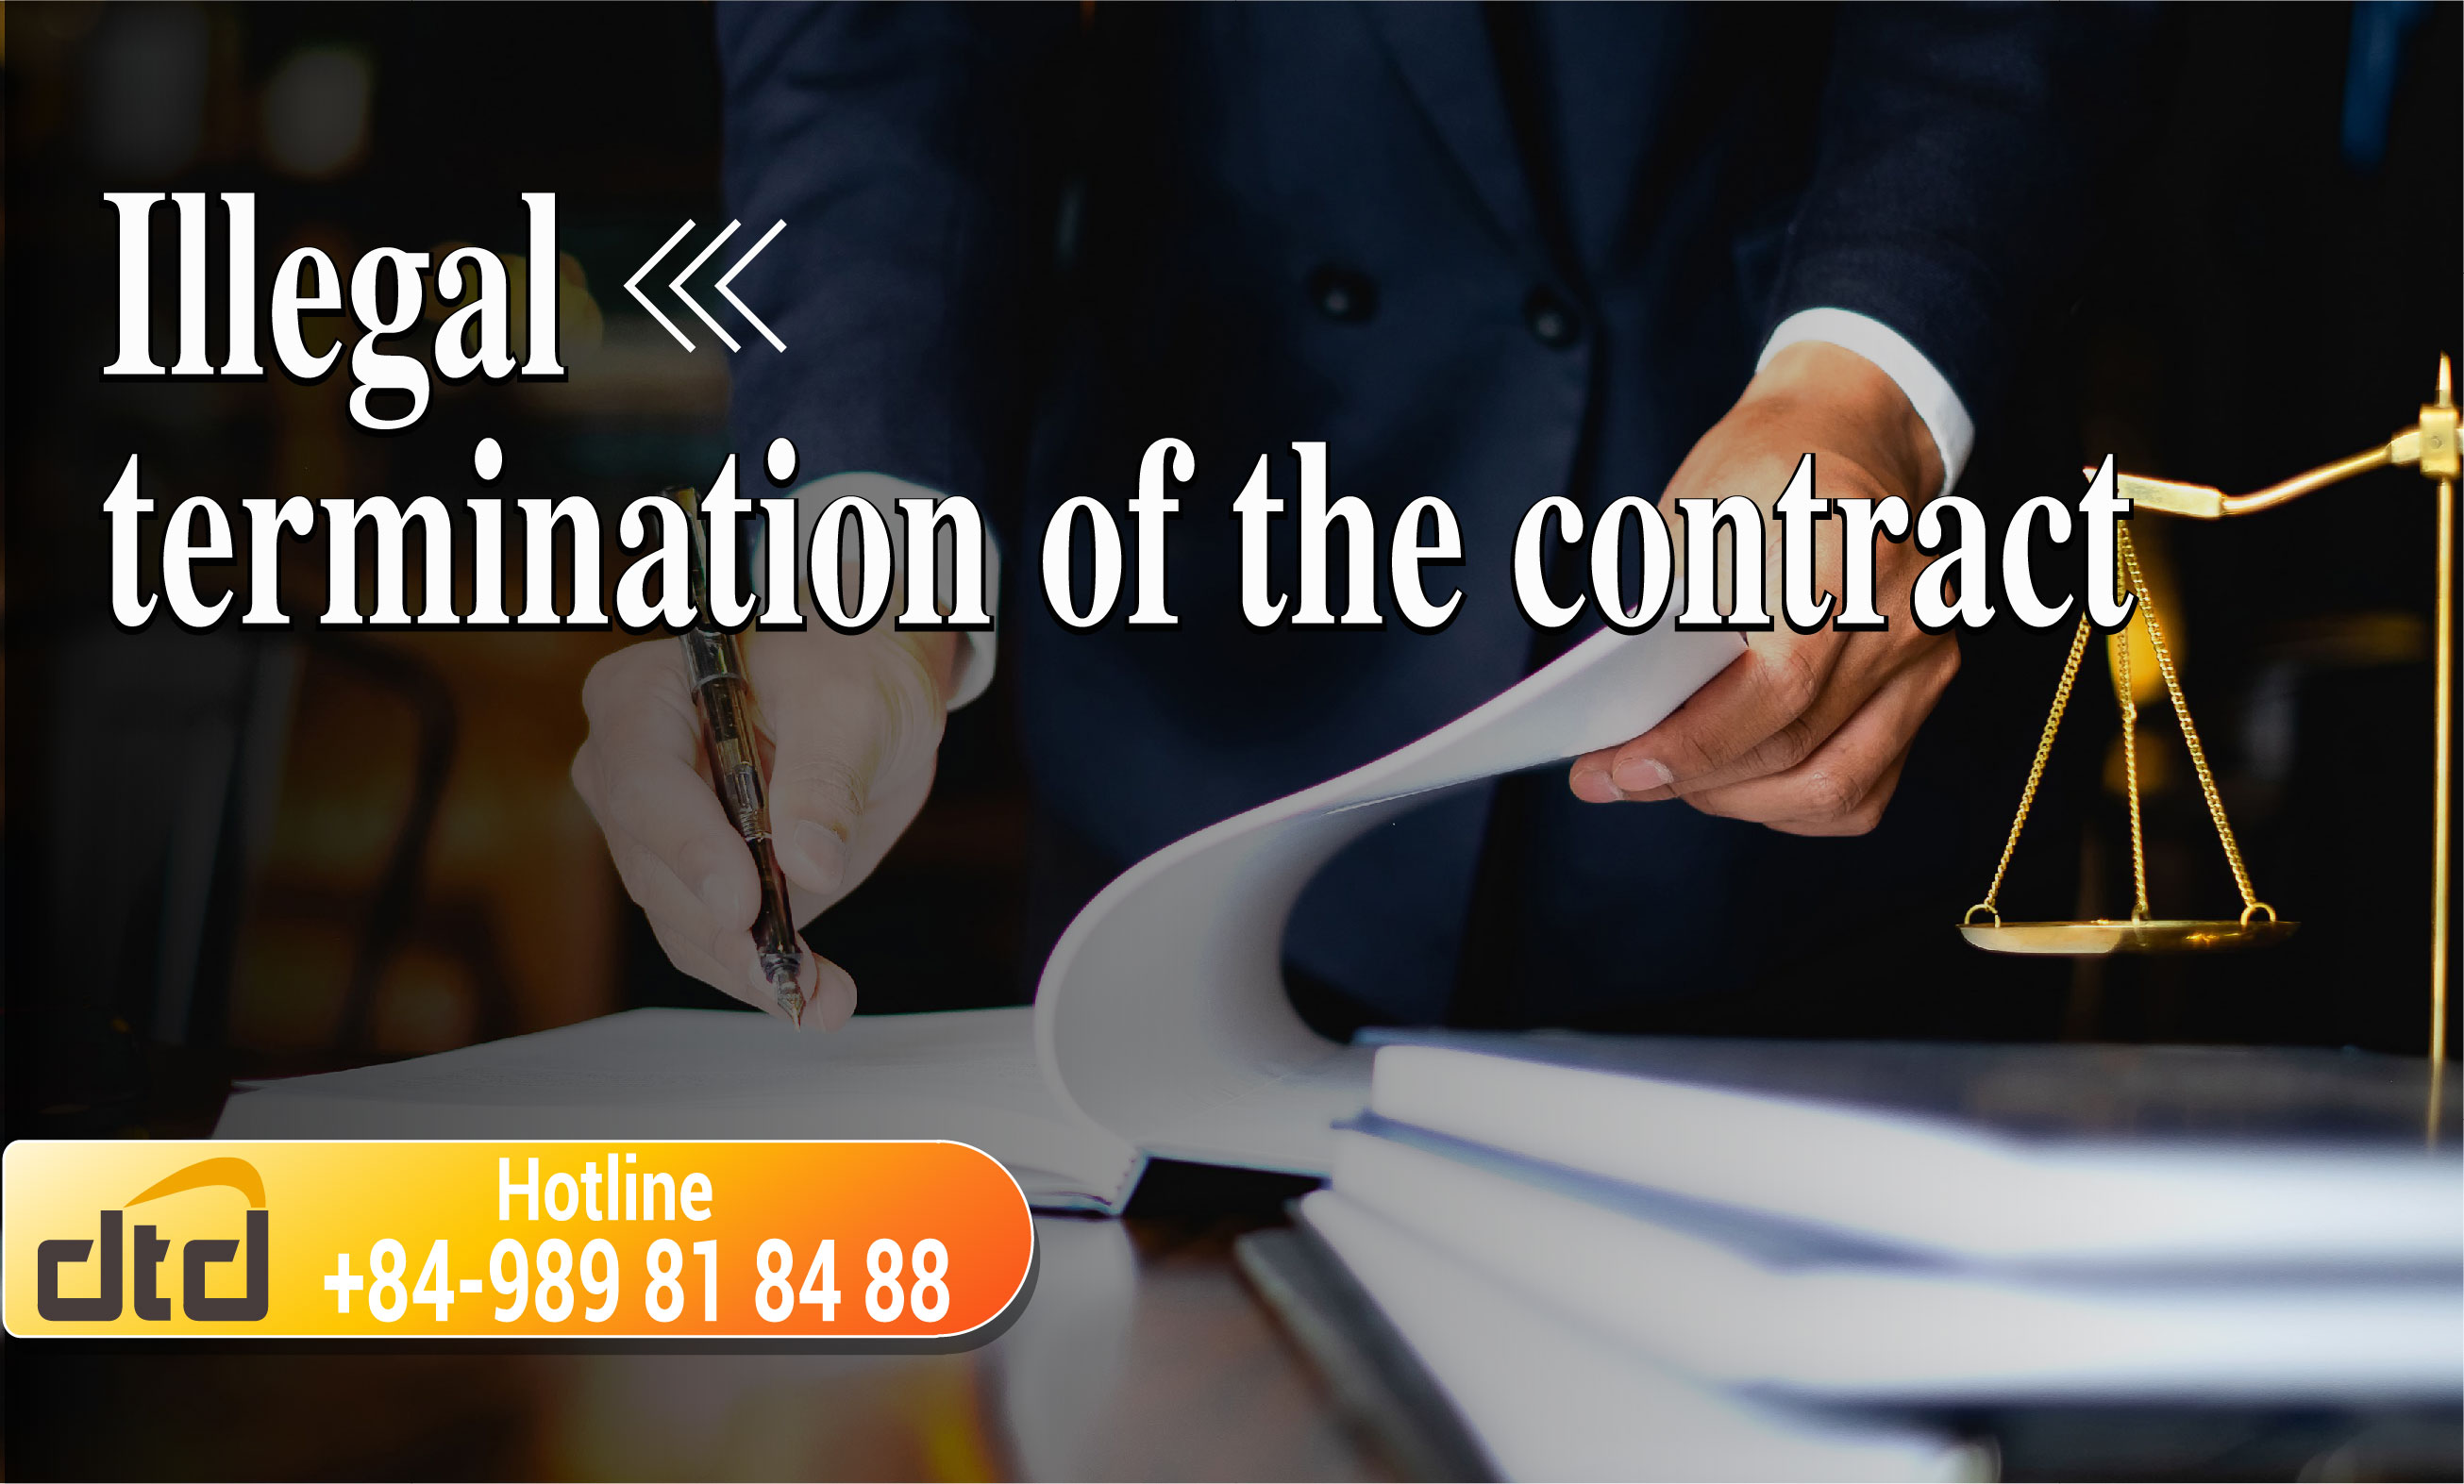 Illegal termination of the contract